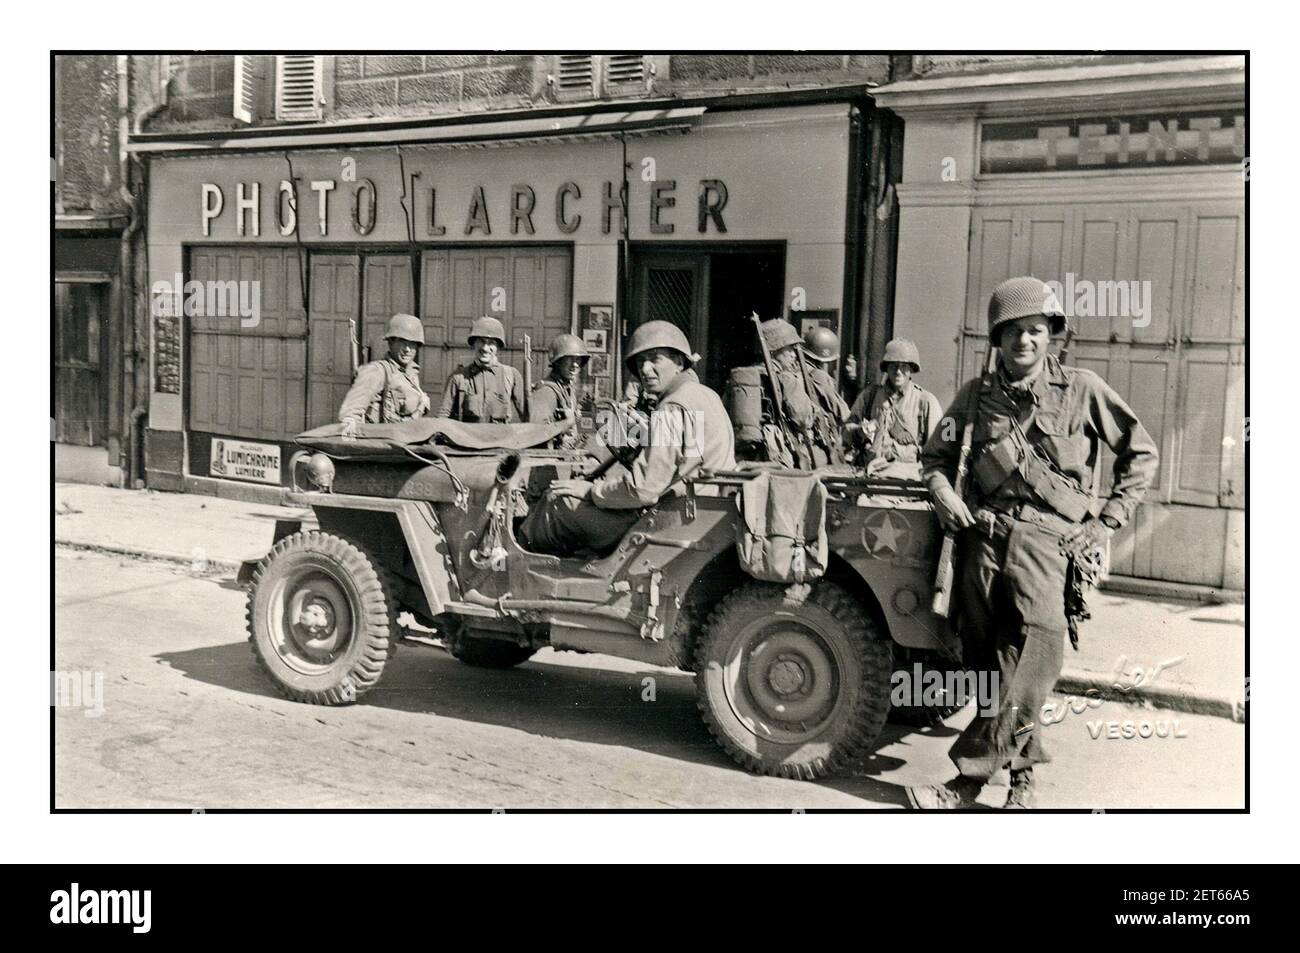 1945 D-Day The advance of the American Allies after D-Day in Normandy, the liberation of France and the surrender of Nazi Germany occupation. American troops pictured with their jeep in rural Northern France after D-Day Stock Photo